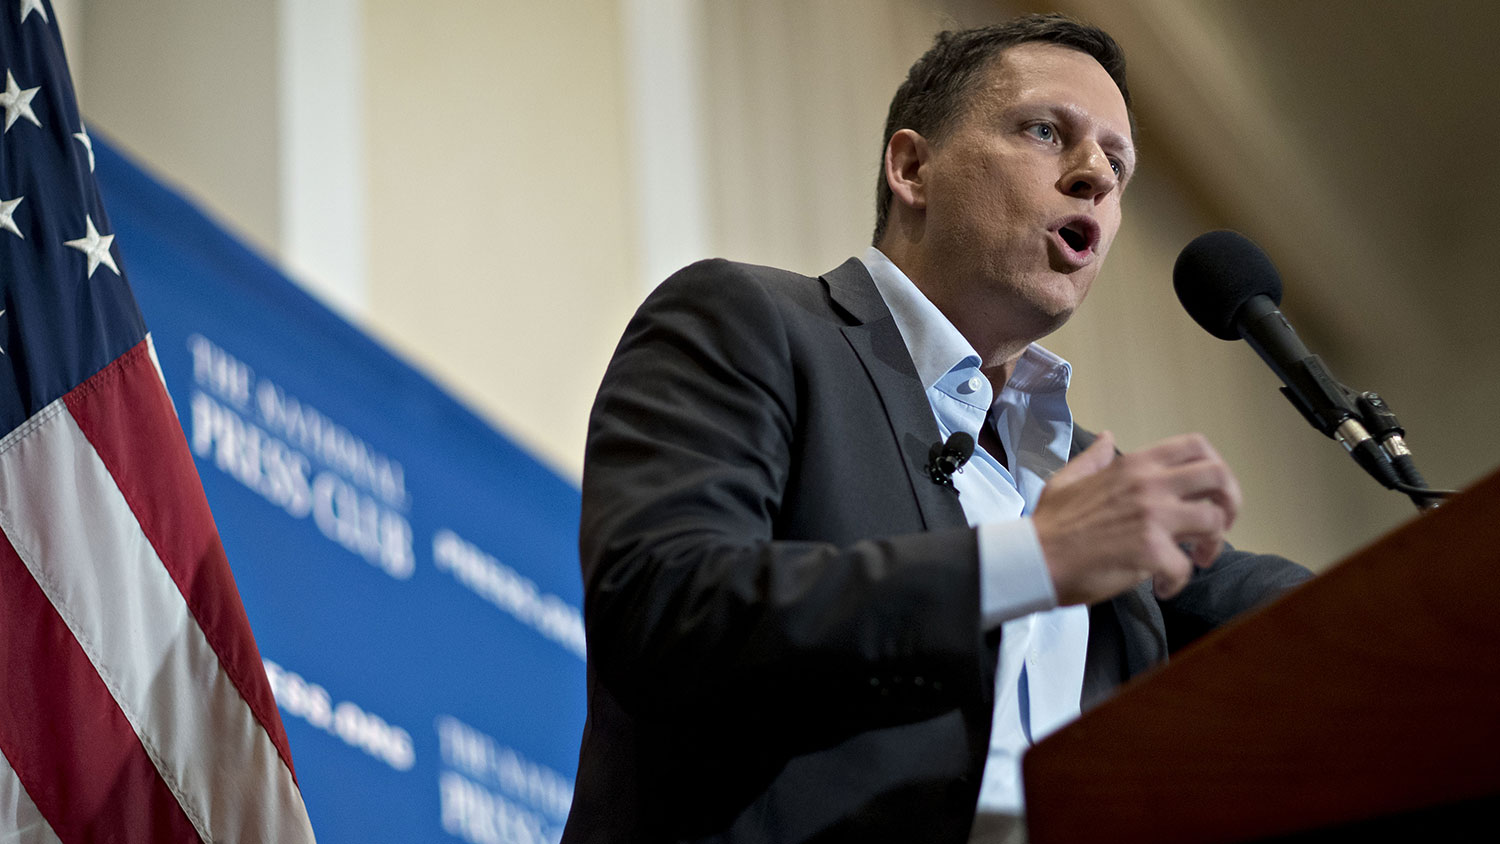 Peter Thiel, co-founder of PayPal Inc., speaks during a news conference at the National Press Club in Washington on Oct. 31, 2016.
